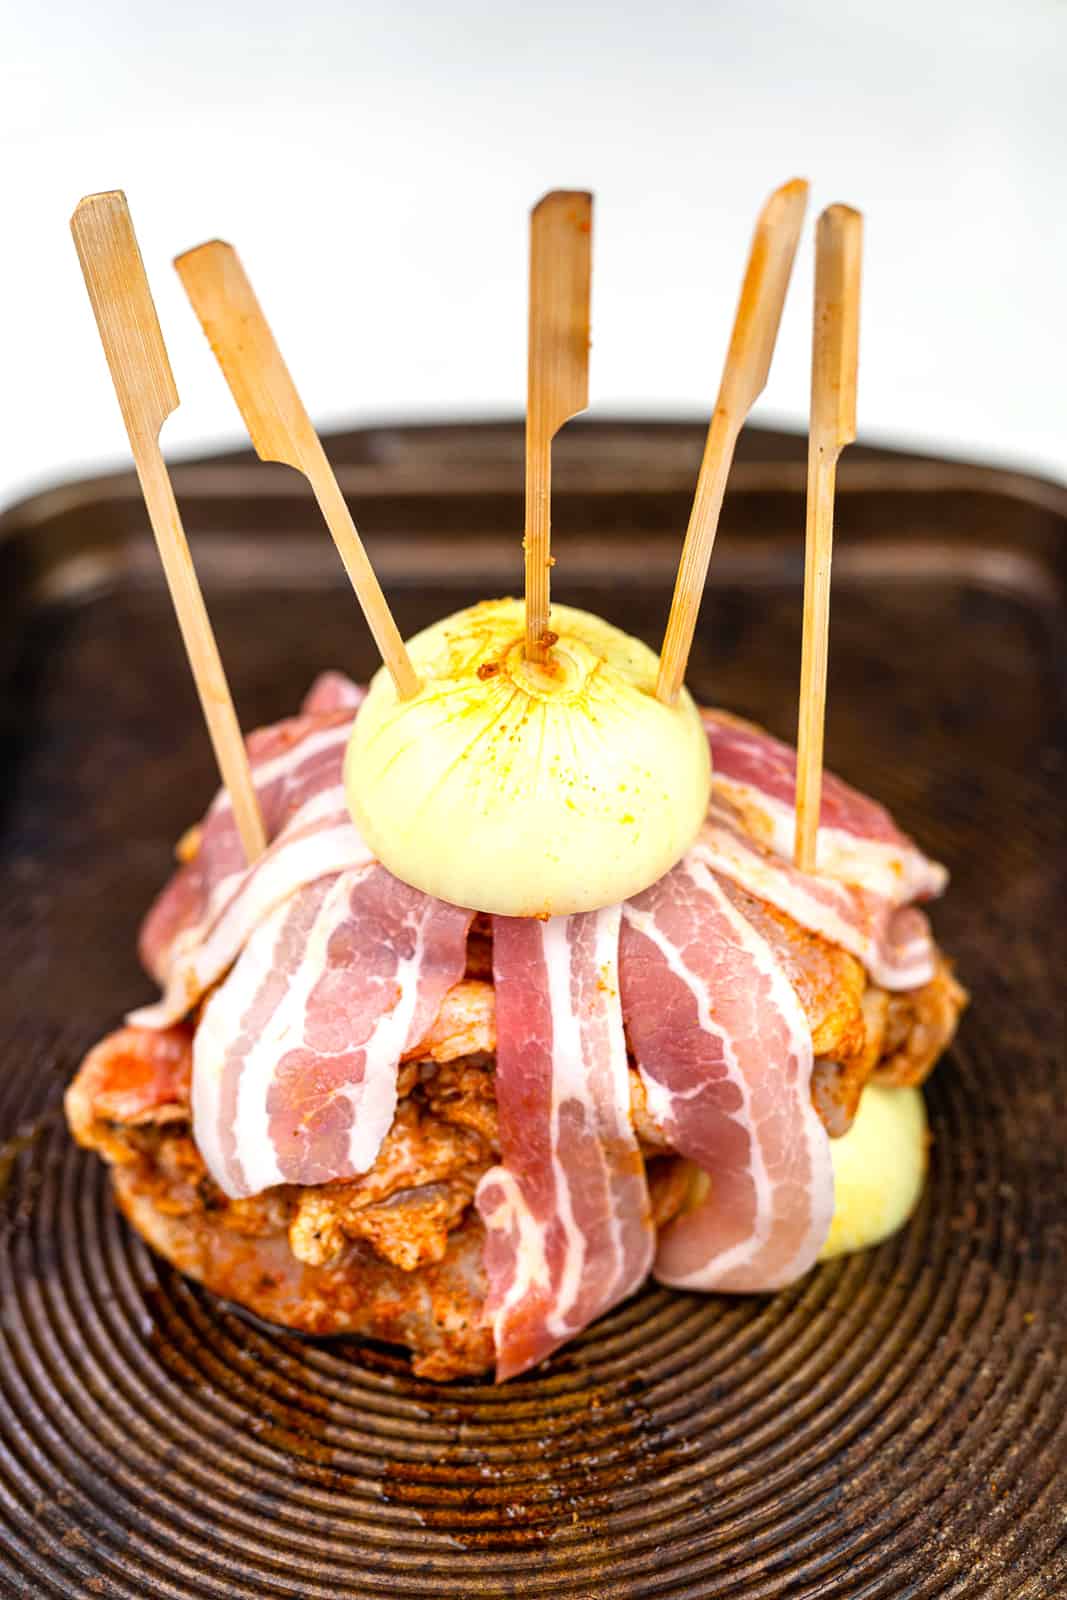 Marinated chicken in a stack topped with streaky bacon and half an onion, secured by wooden skewers